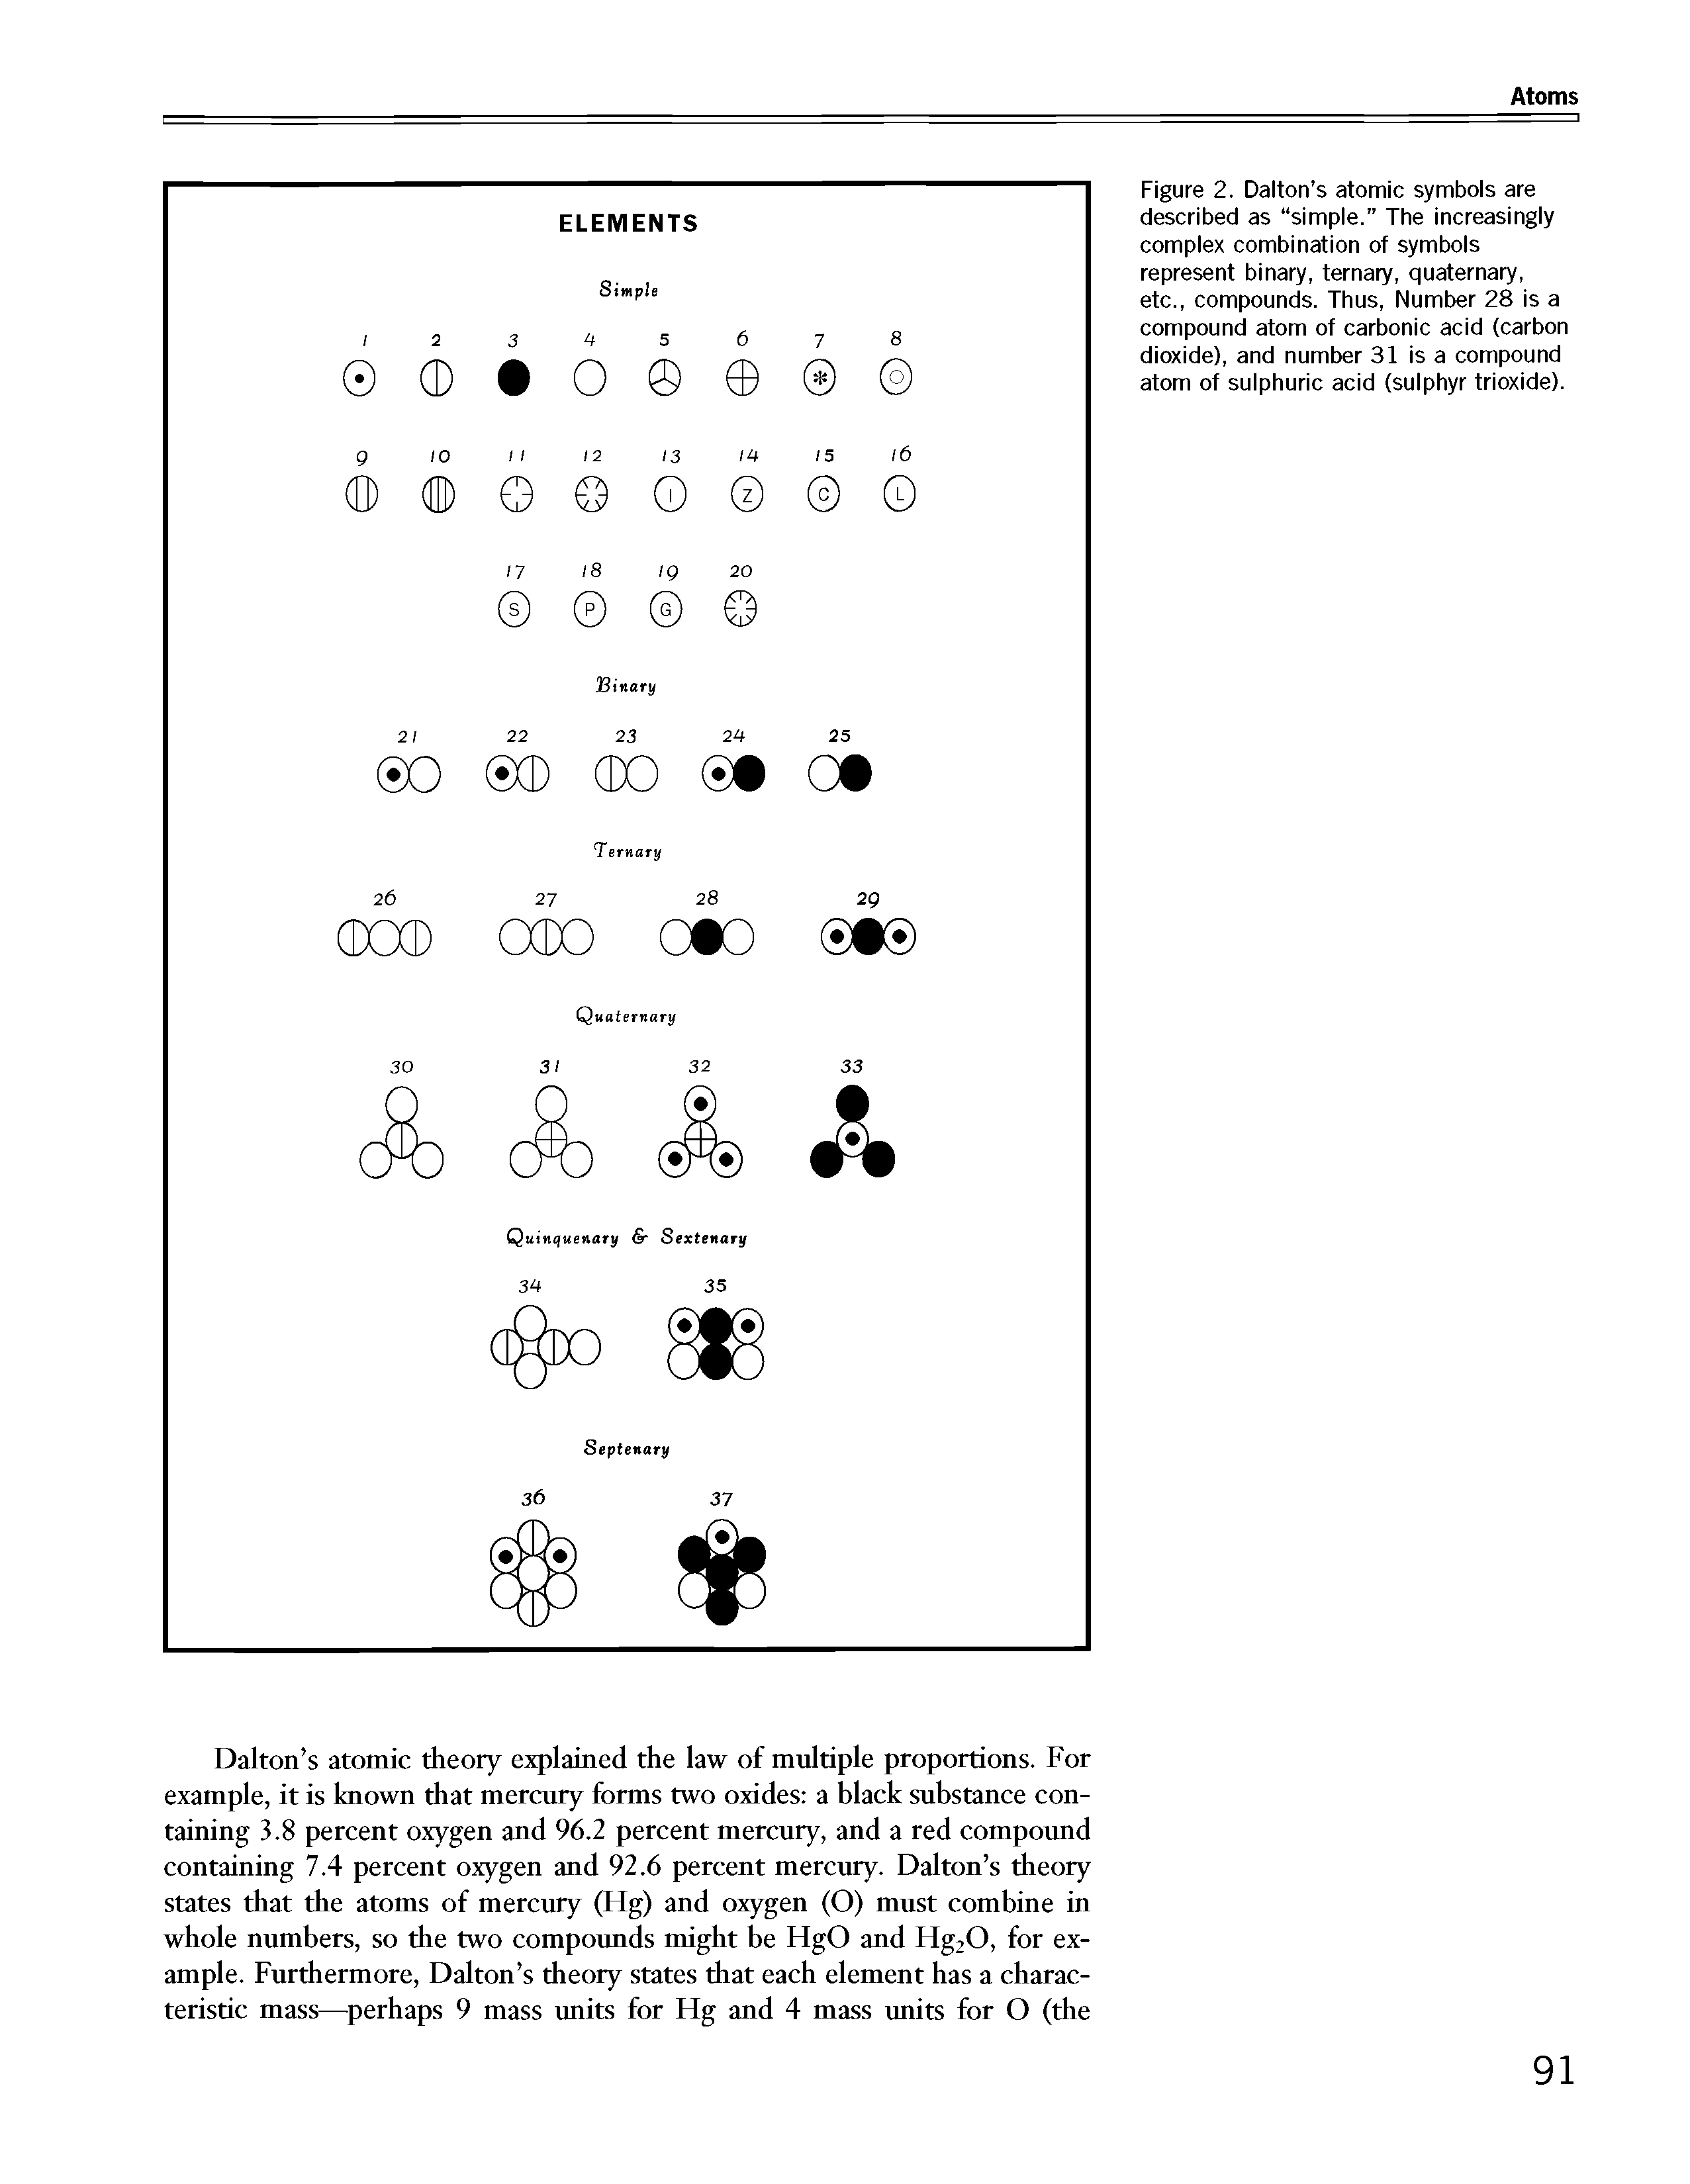 Figure 2. Dalton s atomic symbols are described as simple. The increasingly complex combination of symbols represent binary, ternary, quaternary, etc., compounds. Thus, Number 28 is a compound atom of carbonic acid (carbon dioxide), and number 31 is a compound atom of sulphuric acid (sulphyr frioxide).